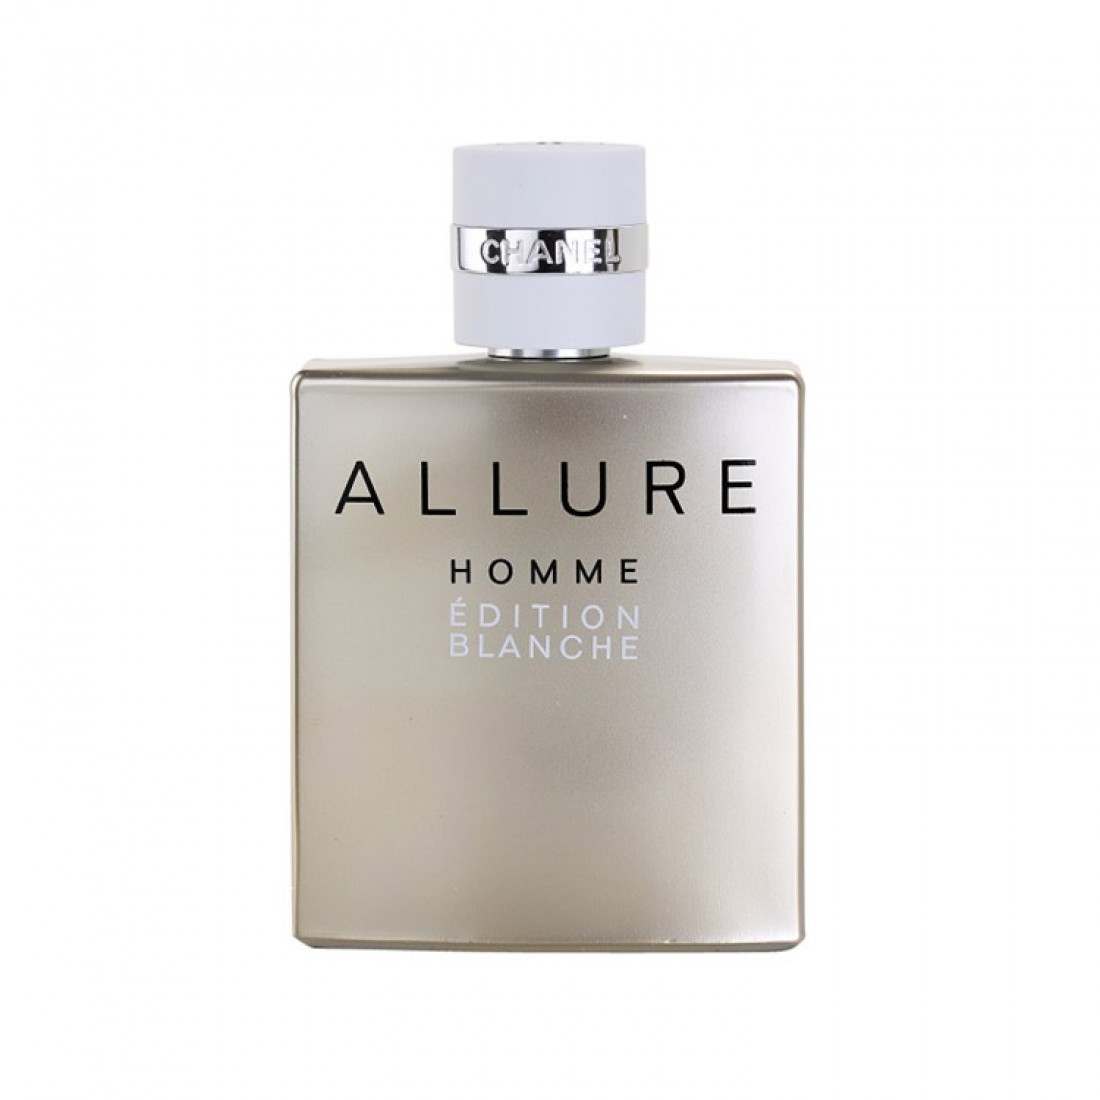 Chanel homme edition blanche. Chanel Allure homme Edition Blanche 100ml. Chanel Allure homme Edition Blanche for men EDP 100ml. Chanel Allure Edition Blanche. Chanel Blanche Edition мужские.